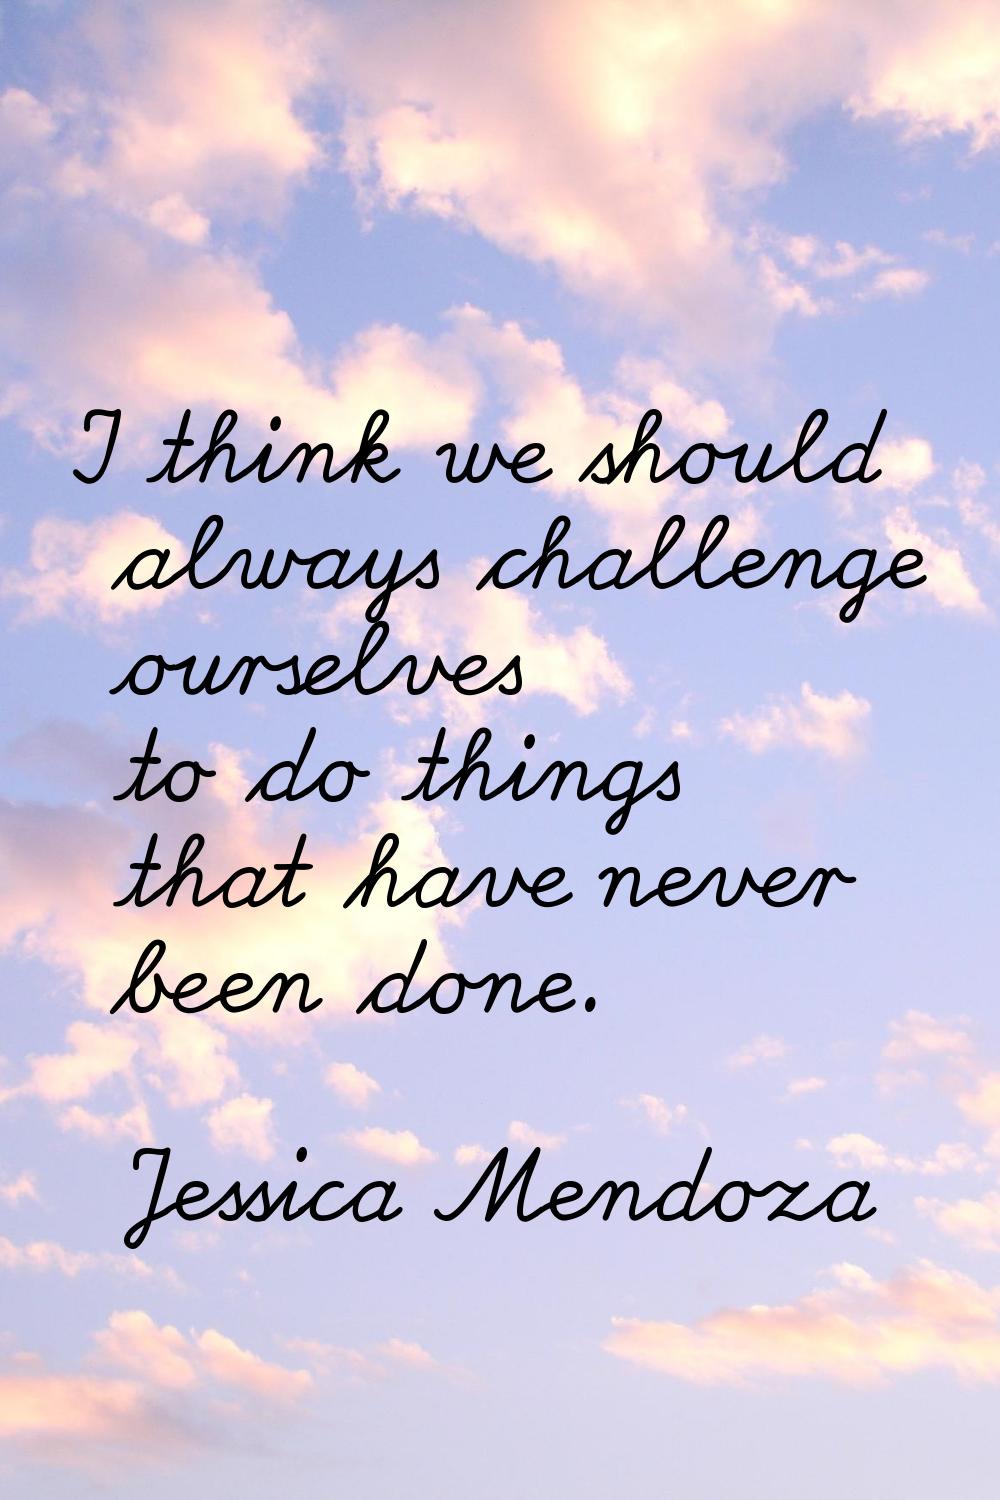 I think we should always challenge ourselves to do things that have never been done.